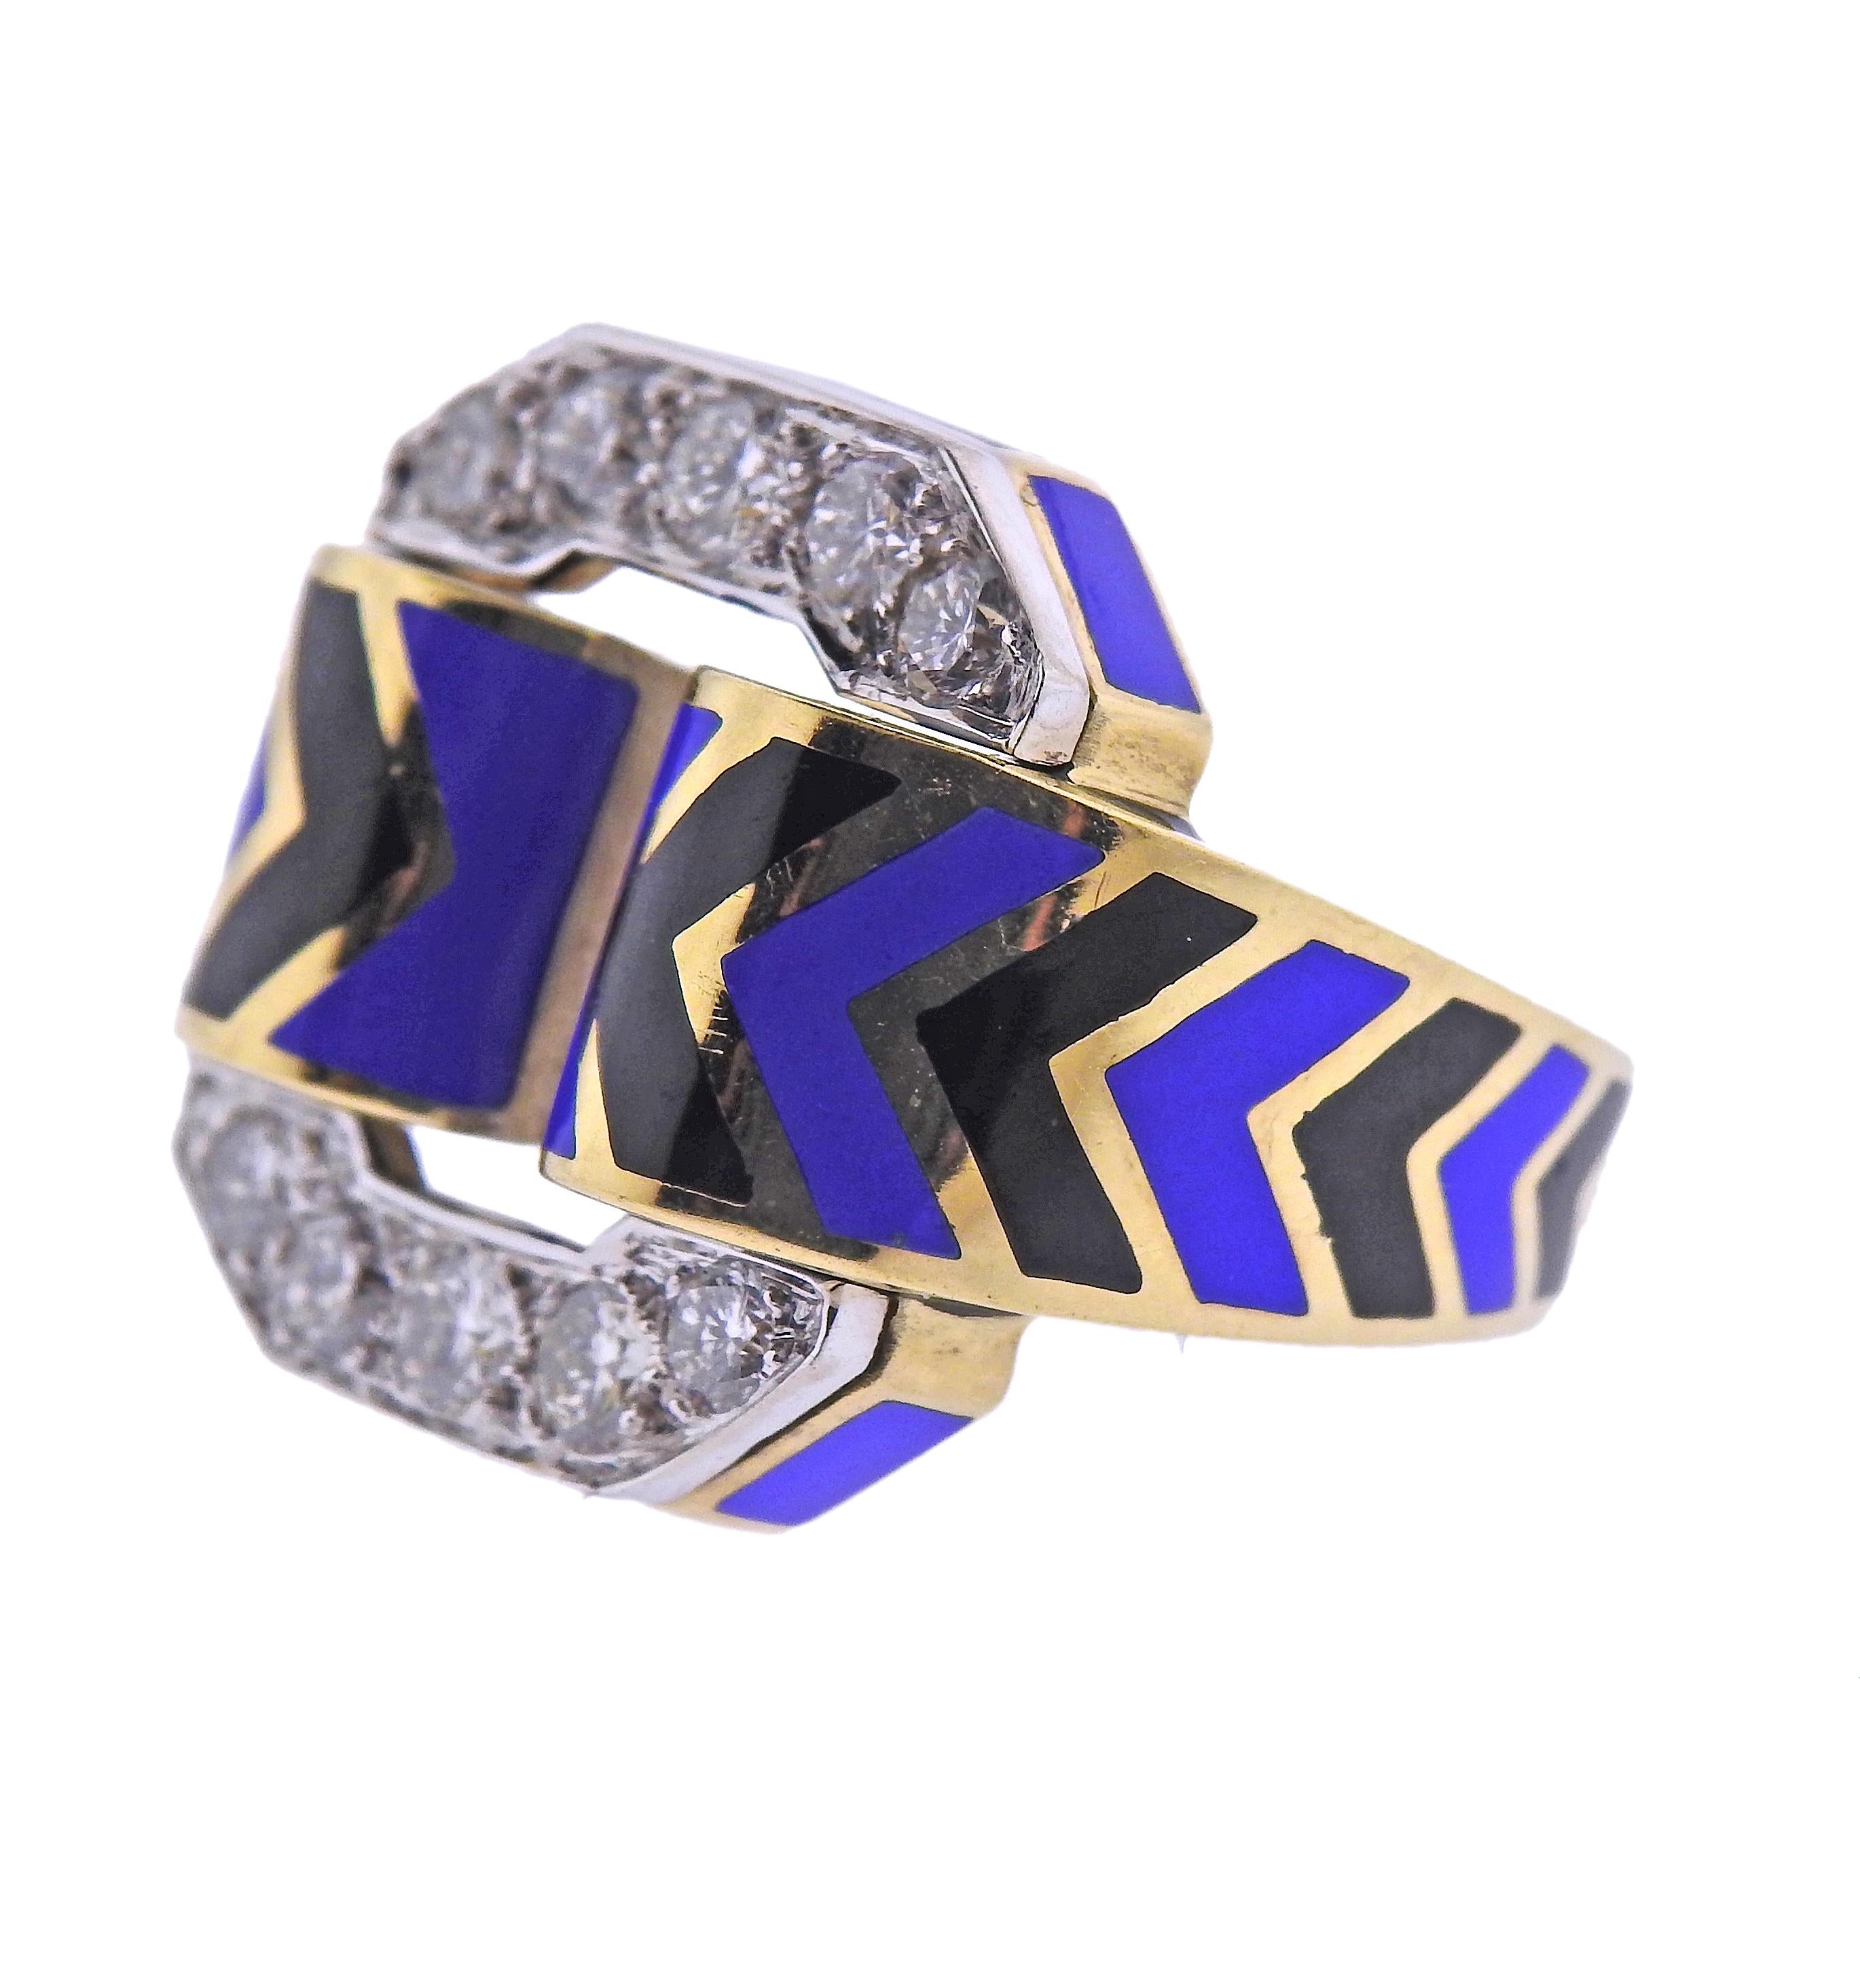 18k gold ring, with blue and black enamel, set with approx. 1.00ctw in diamonds.  Ring size - 5.25, ring top - 21mm x 25mm. Weight of the piece - 18.7 grams. 